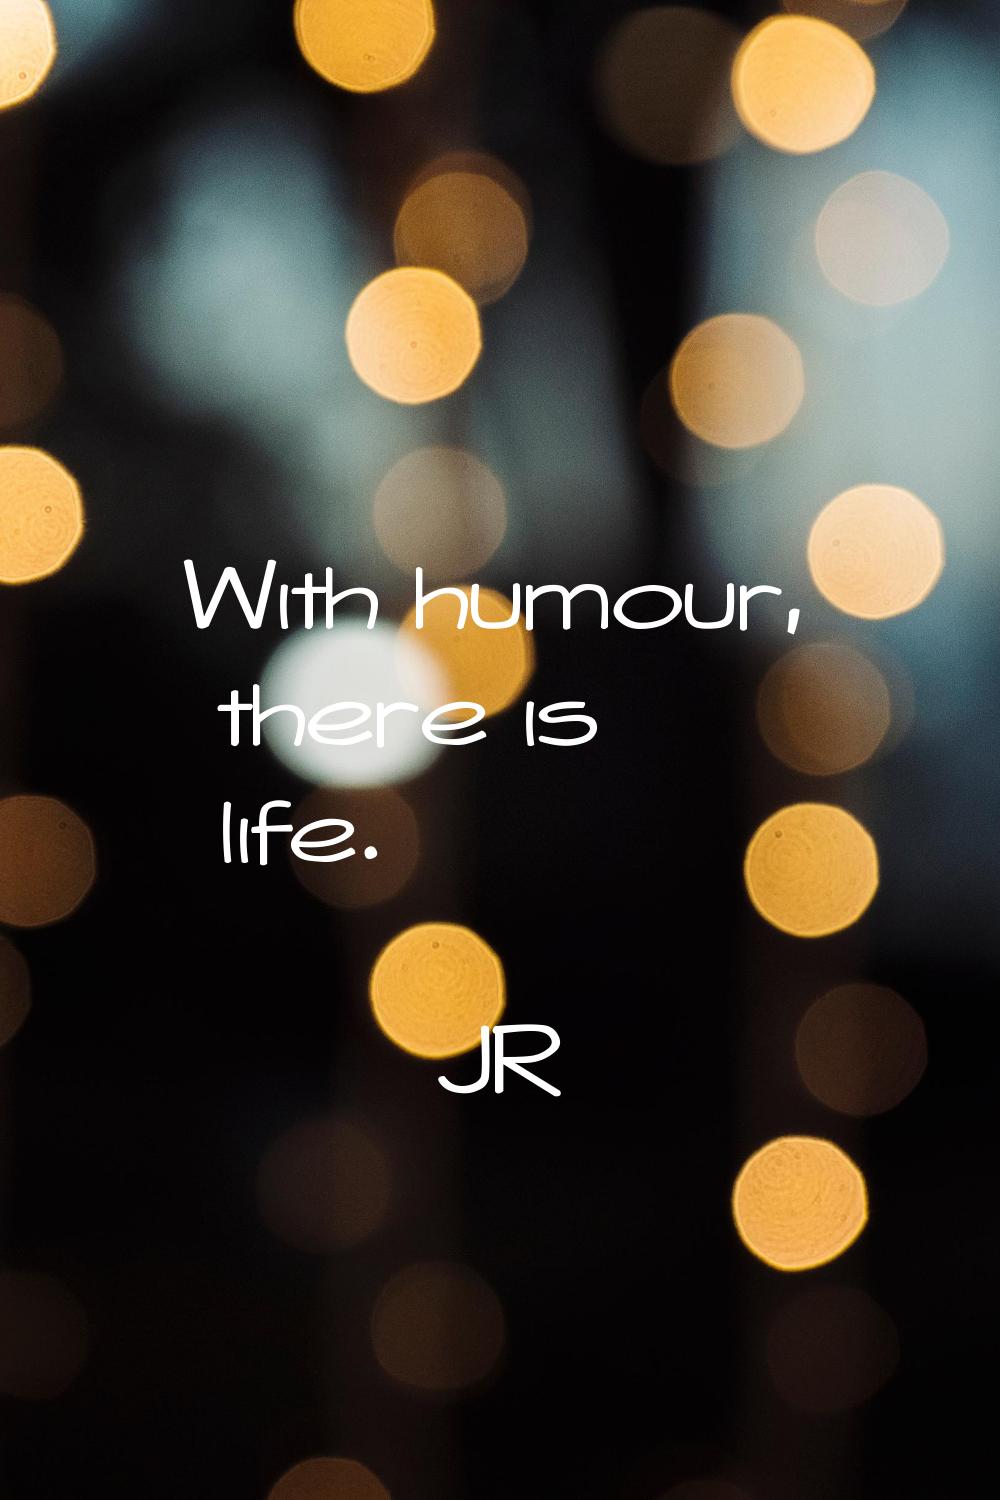 With humour, there is life.